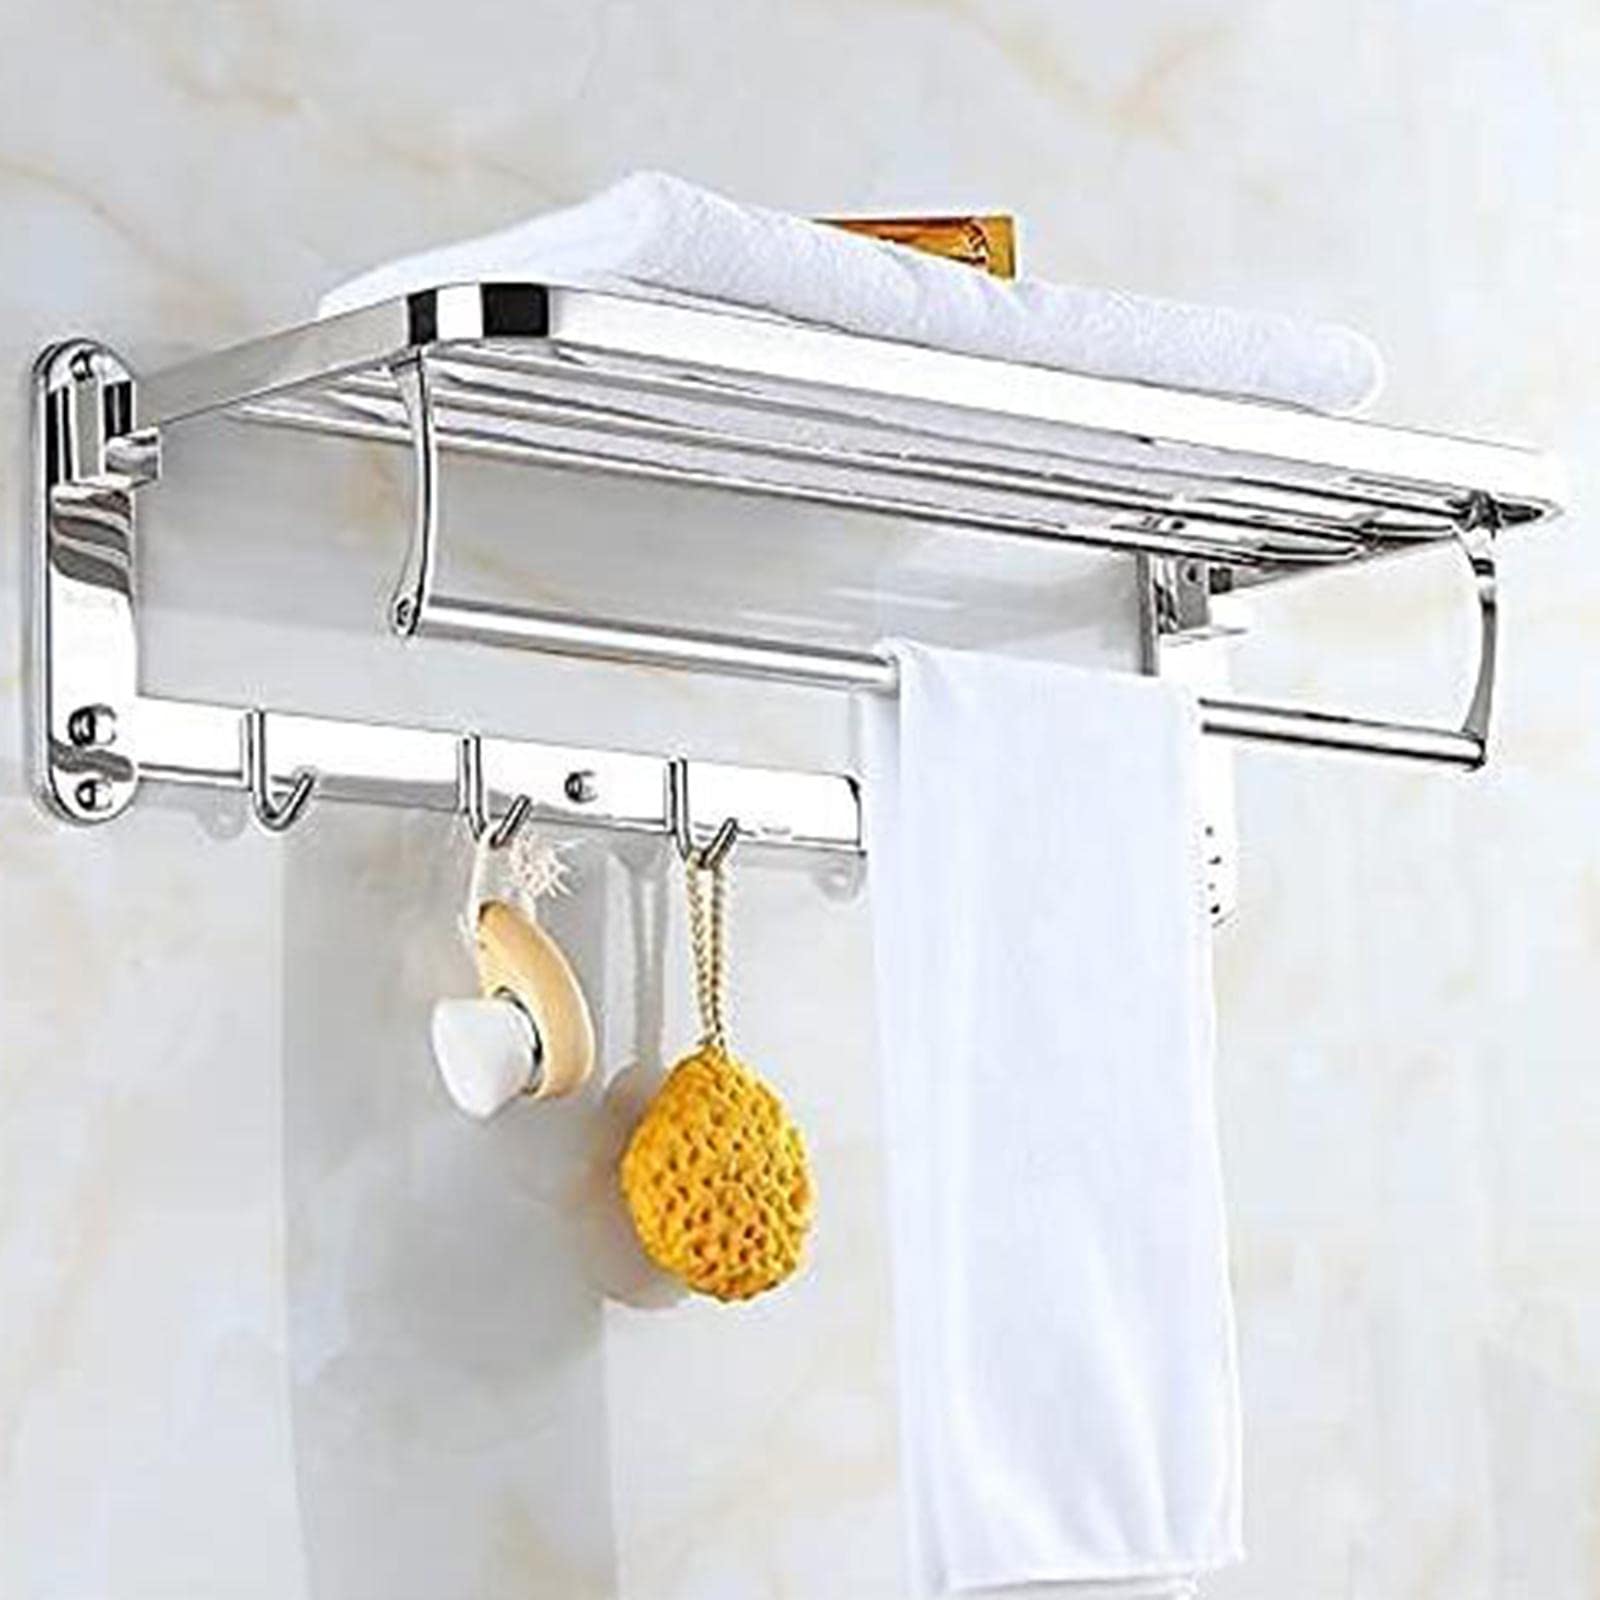 MagiDeal Metal Storage Shelves Wall Mounted with Hooks Durable Stable Towel Bar Organizer Stand Holder for Dormitory Household Bathroom Hotel Kitchen , S